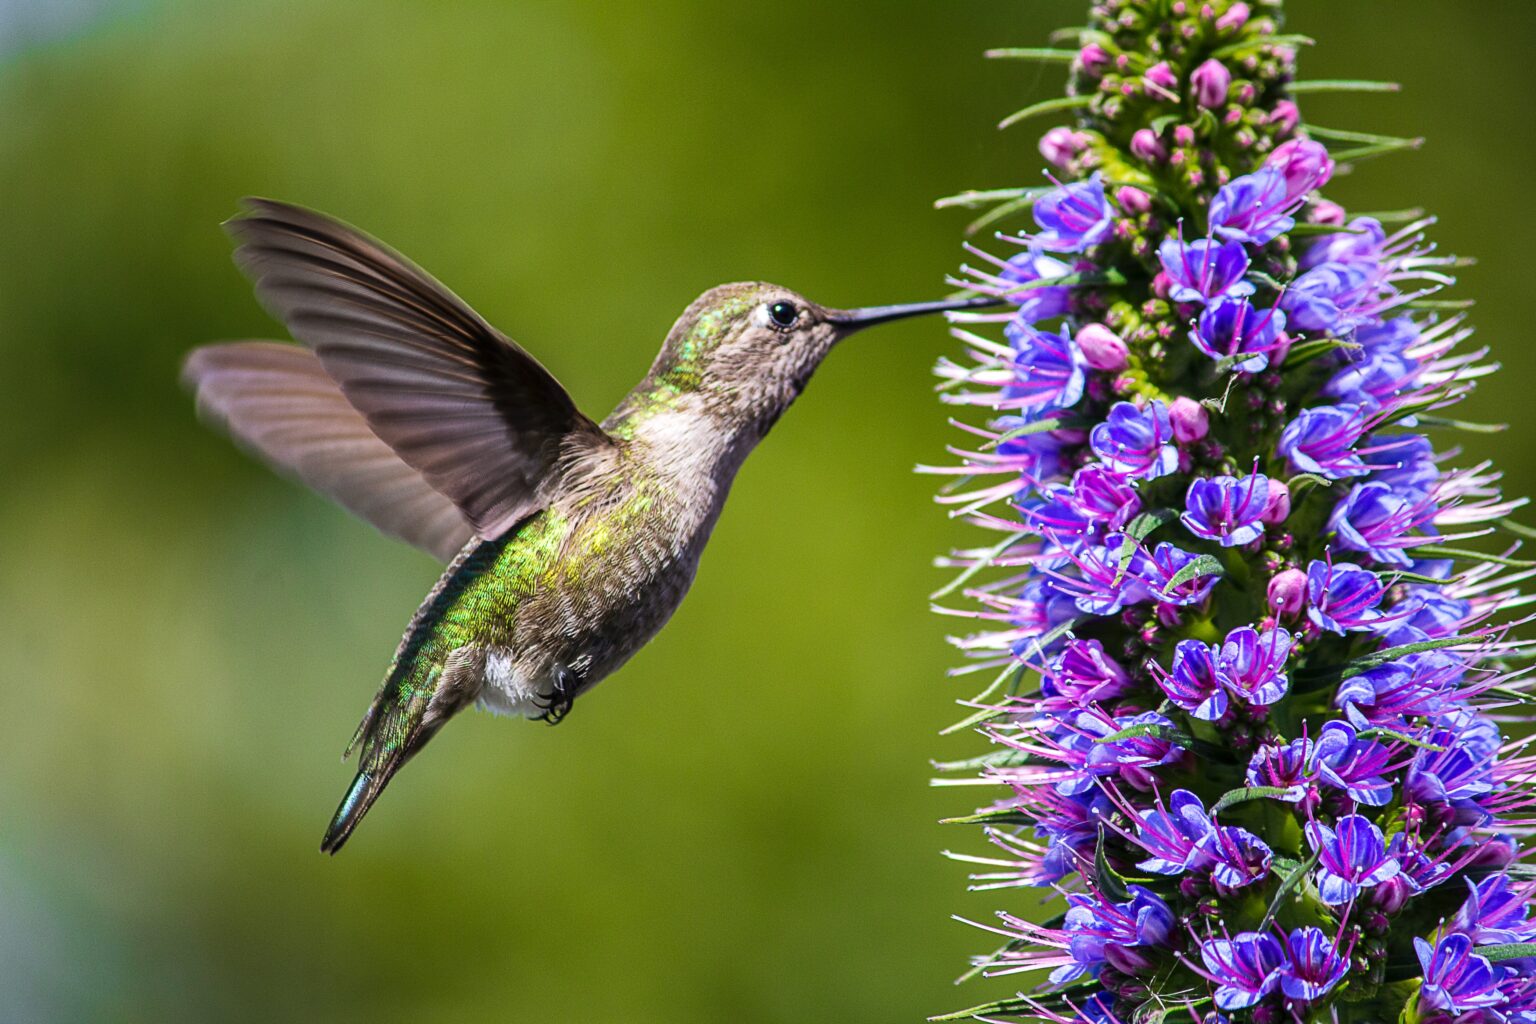 green and brown humming bird flying near purple flower